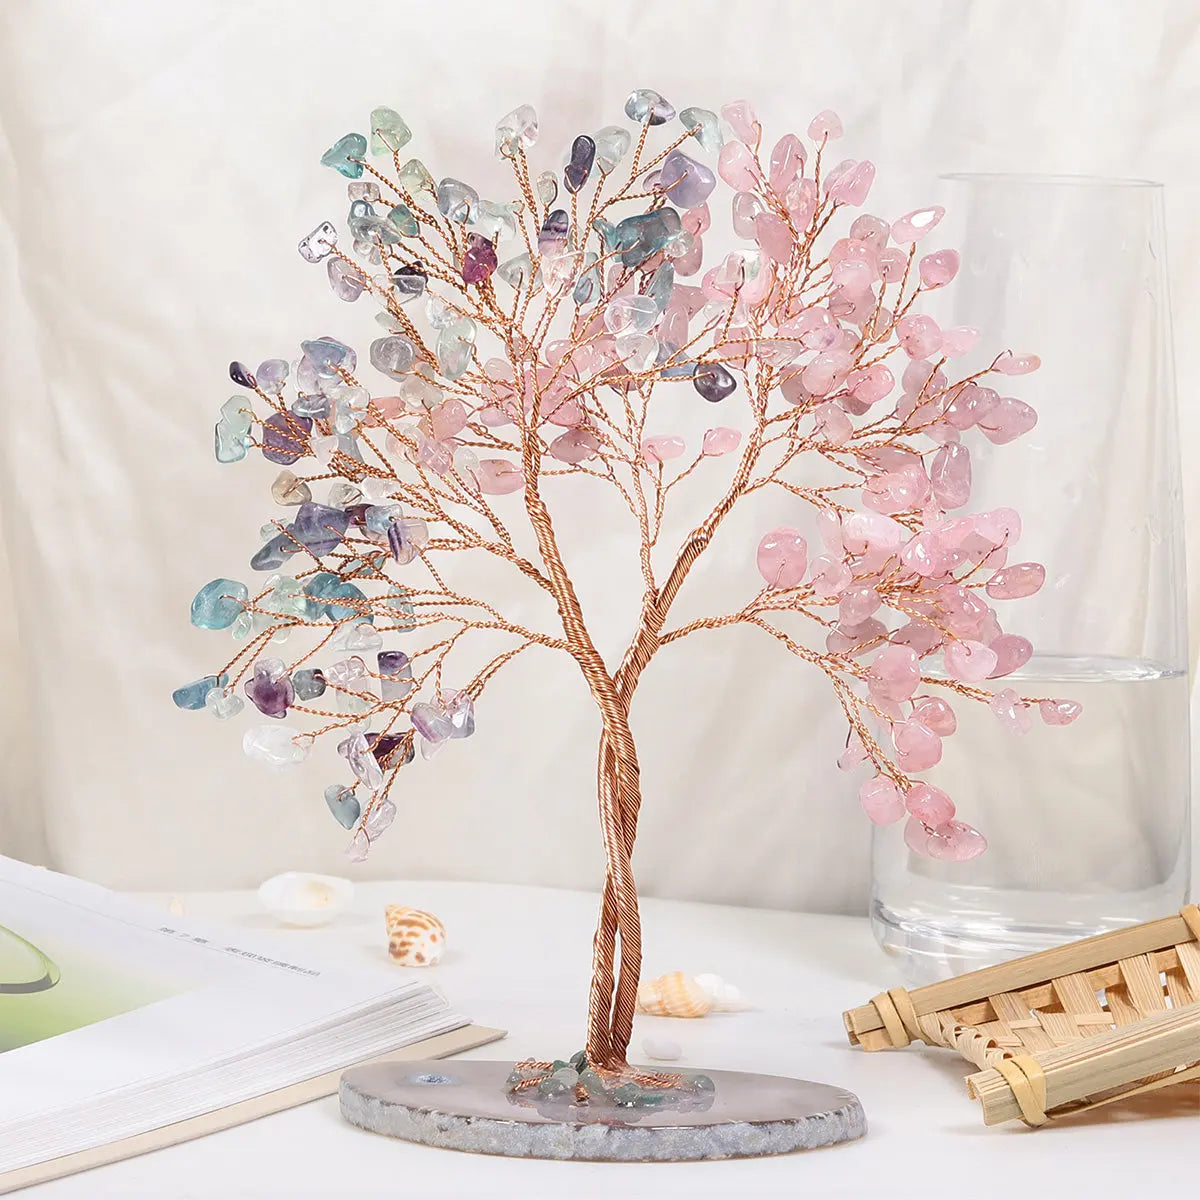 Tree Of Life with Two Branches (Amethyst, Citrine, Rose Quartz, Green Fluorite, Aquamarine, Green Adventurine) Concentric Tree Healing Crystal Home